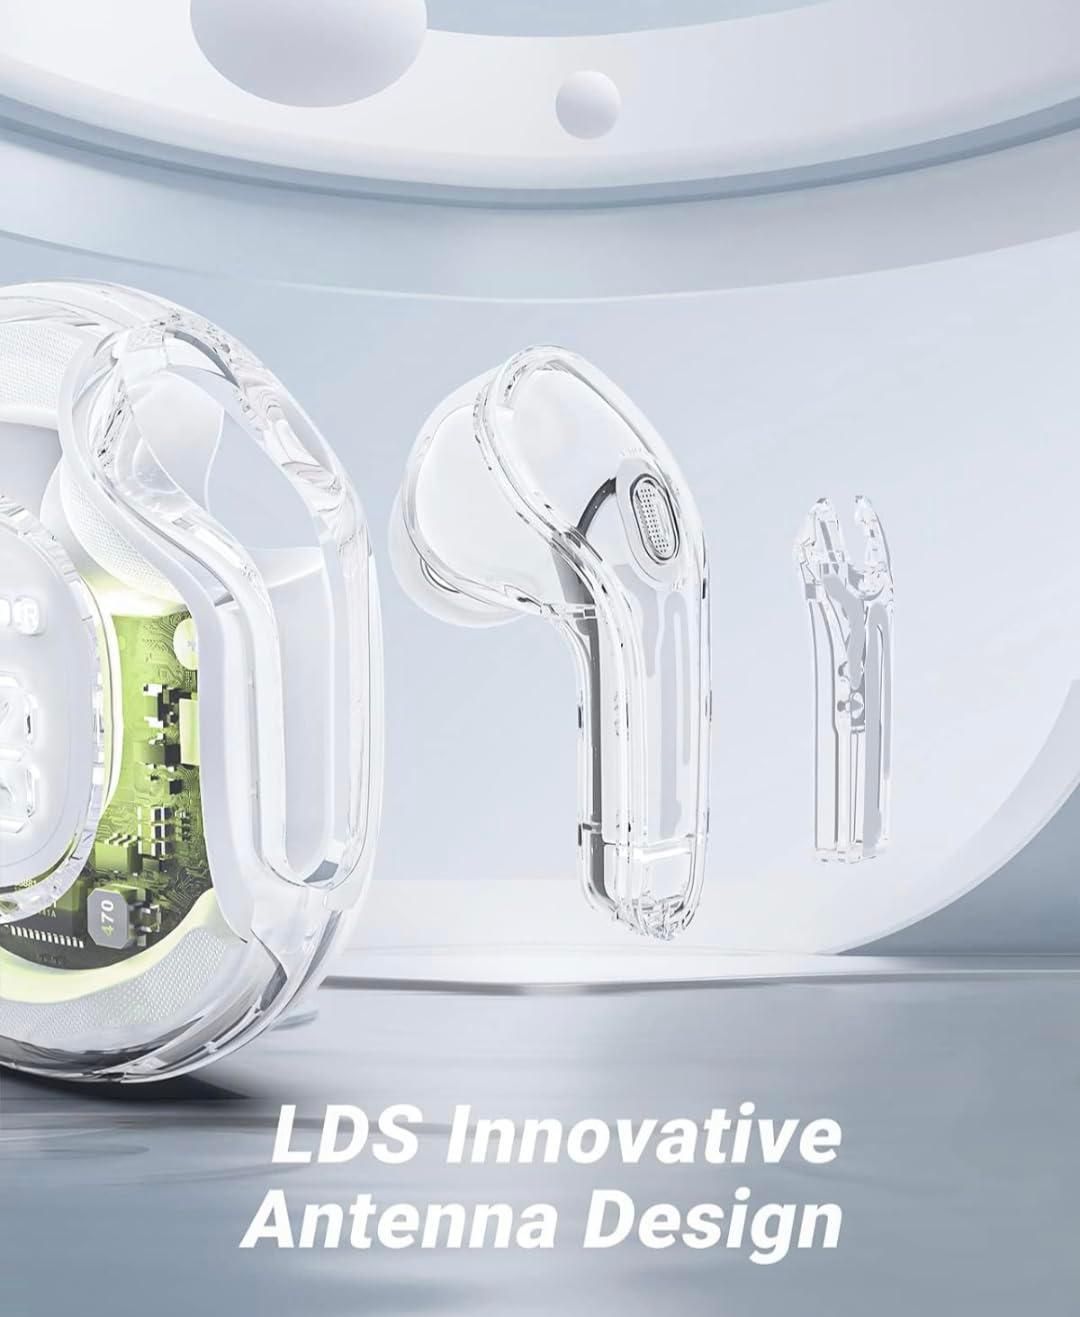 TWS Headphone - Hifi Sound, Low Latency, Super Mini Earbuds with LED Display Screen